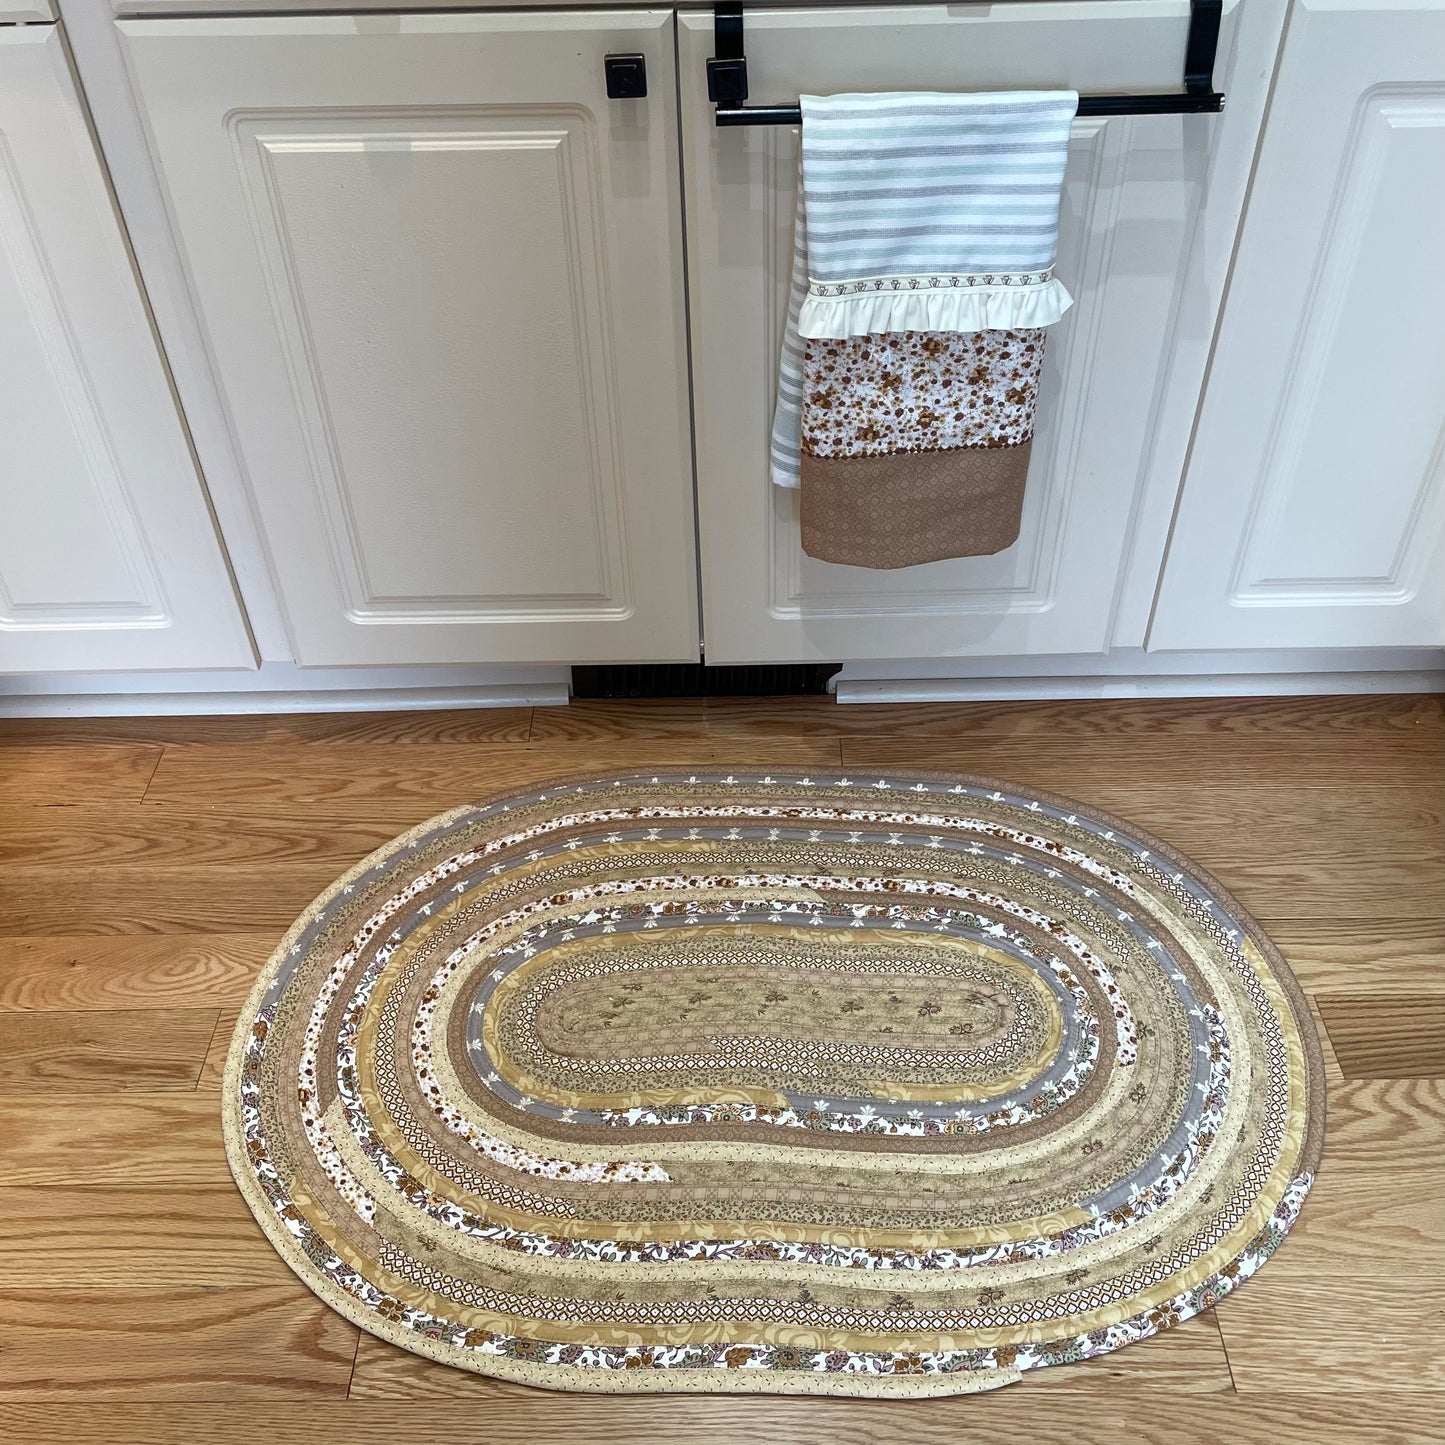 Modern Farmhouse Kitchen Accent Rug For Sink, Bathtub Mat Or Vanity. Washable Cotton Rug Handmade in Canada